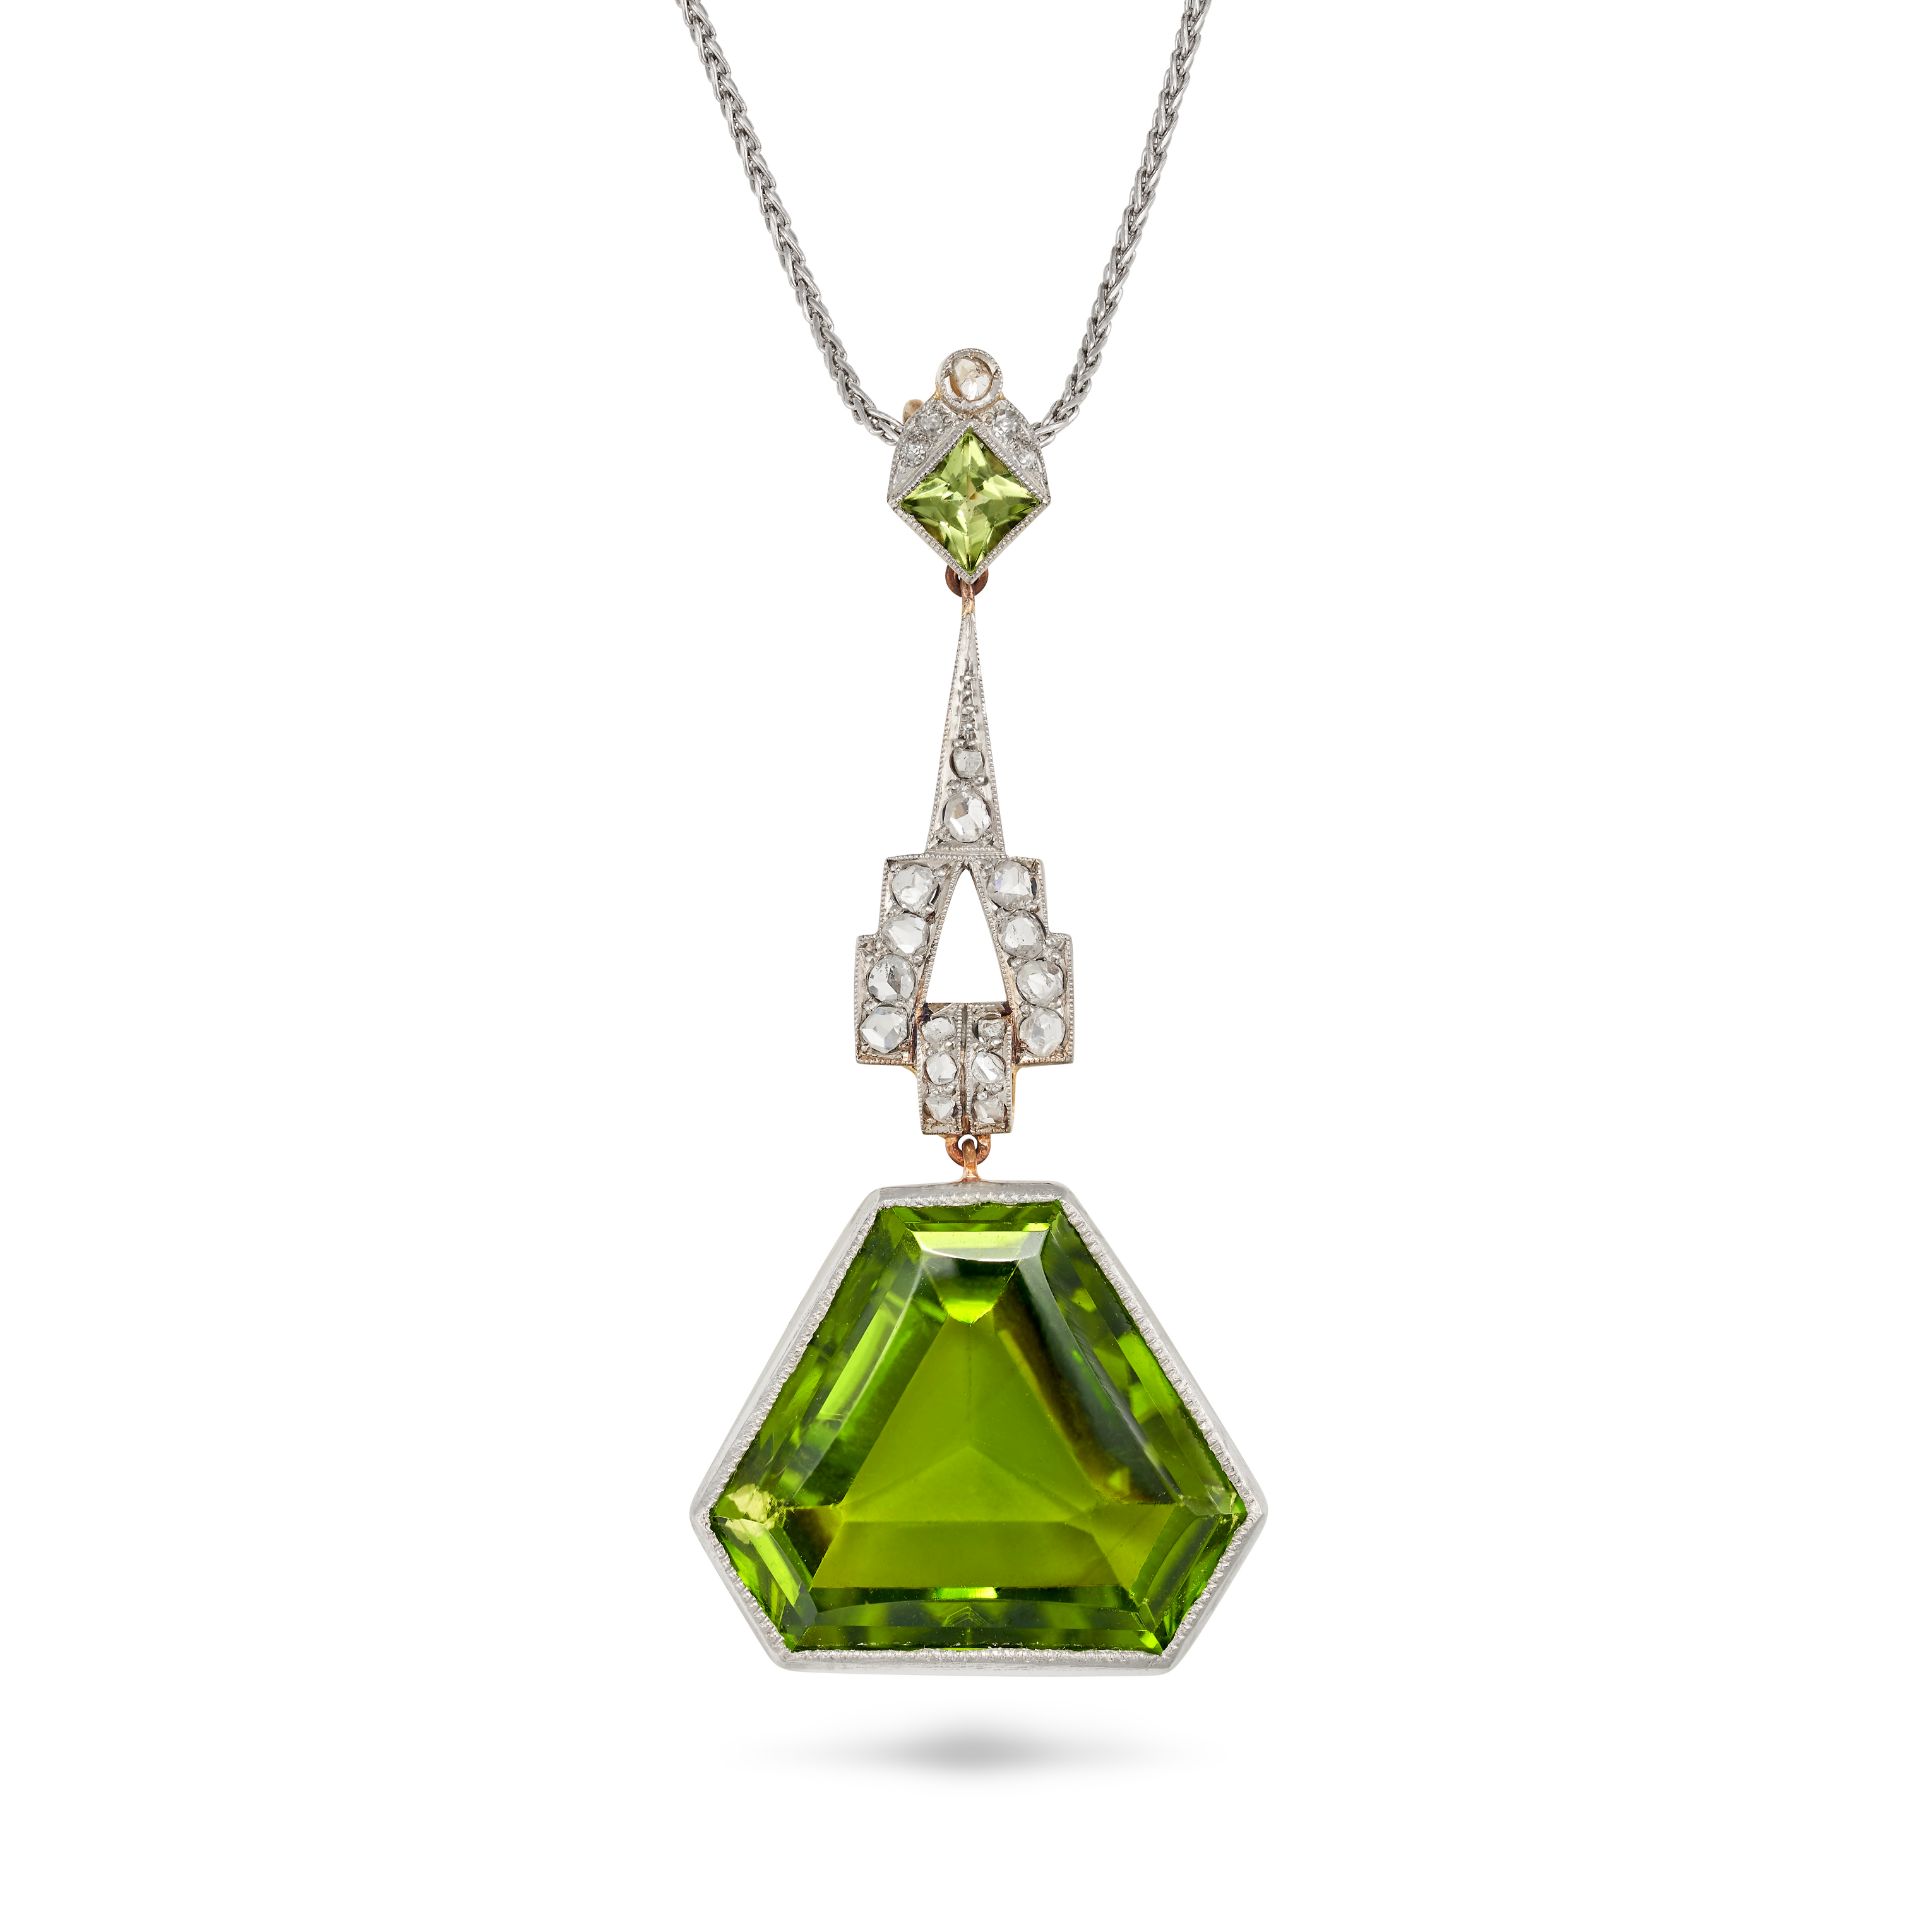 A PERIDOT AND DIAMOND PENDANT NECKLACE in yellow gold and platinum, the pendant comprising a squa...